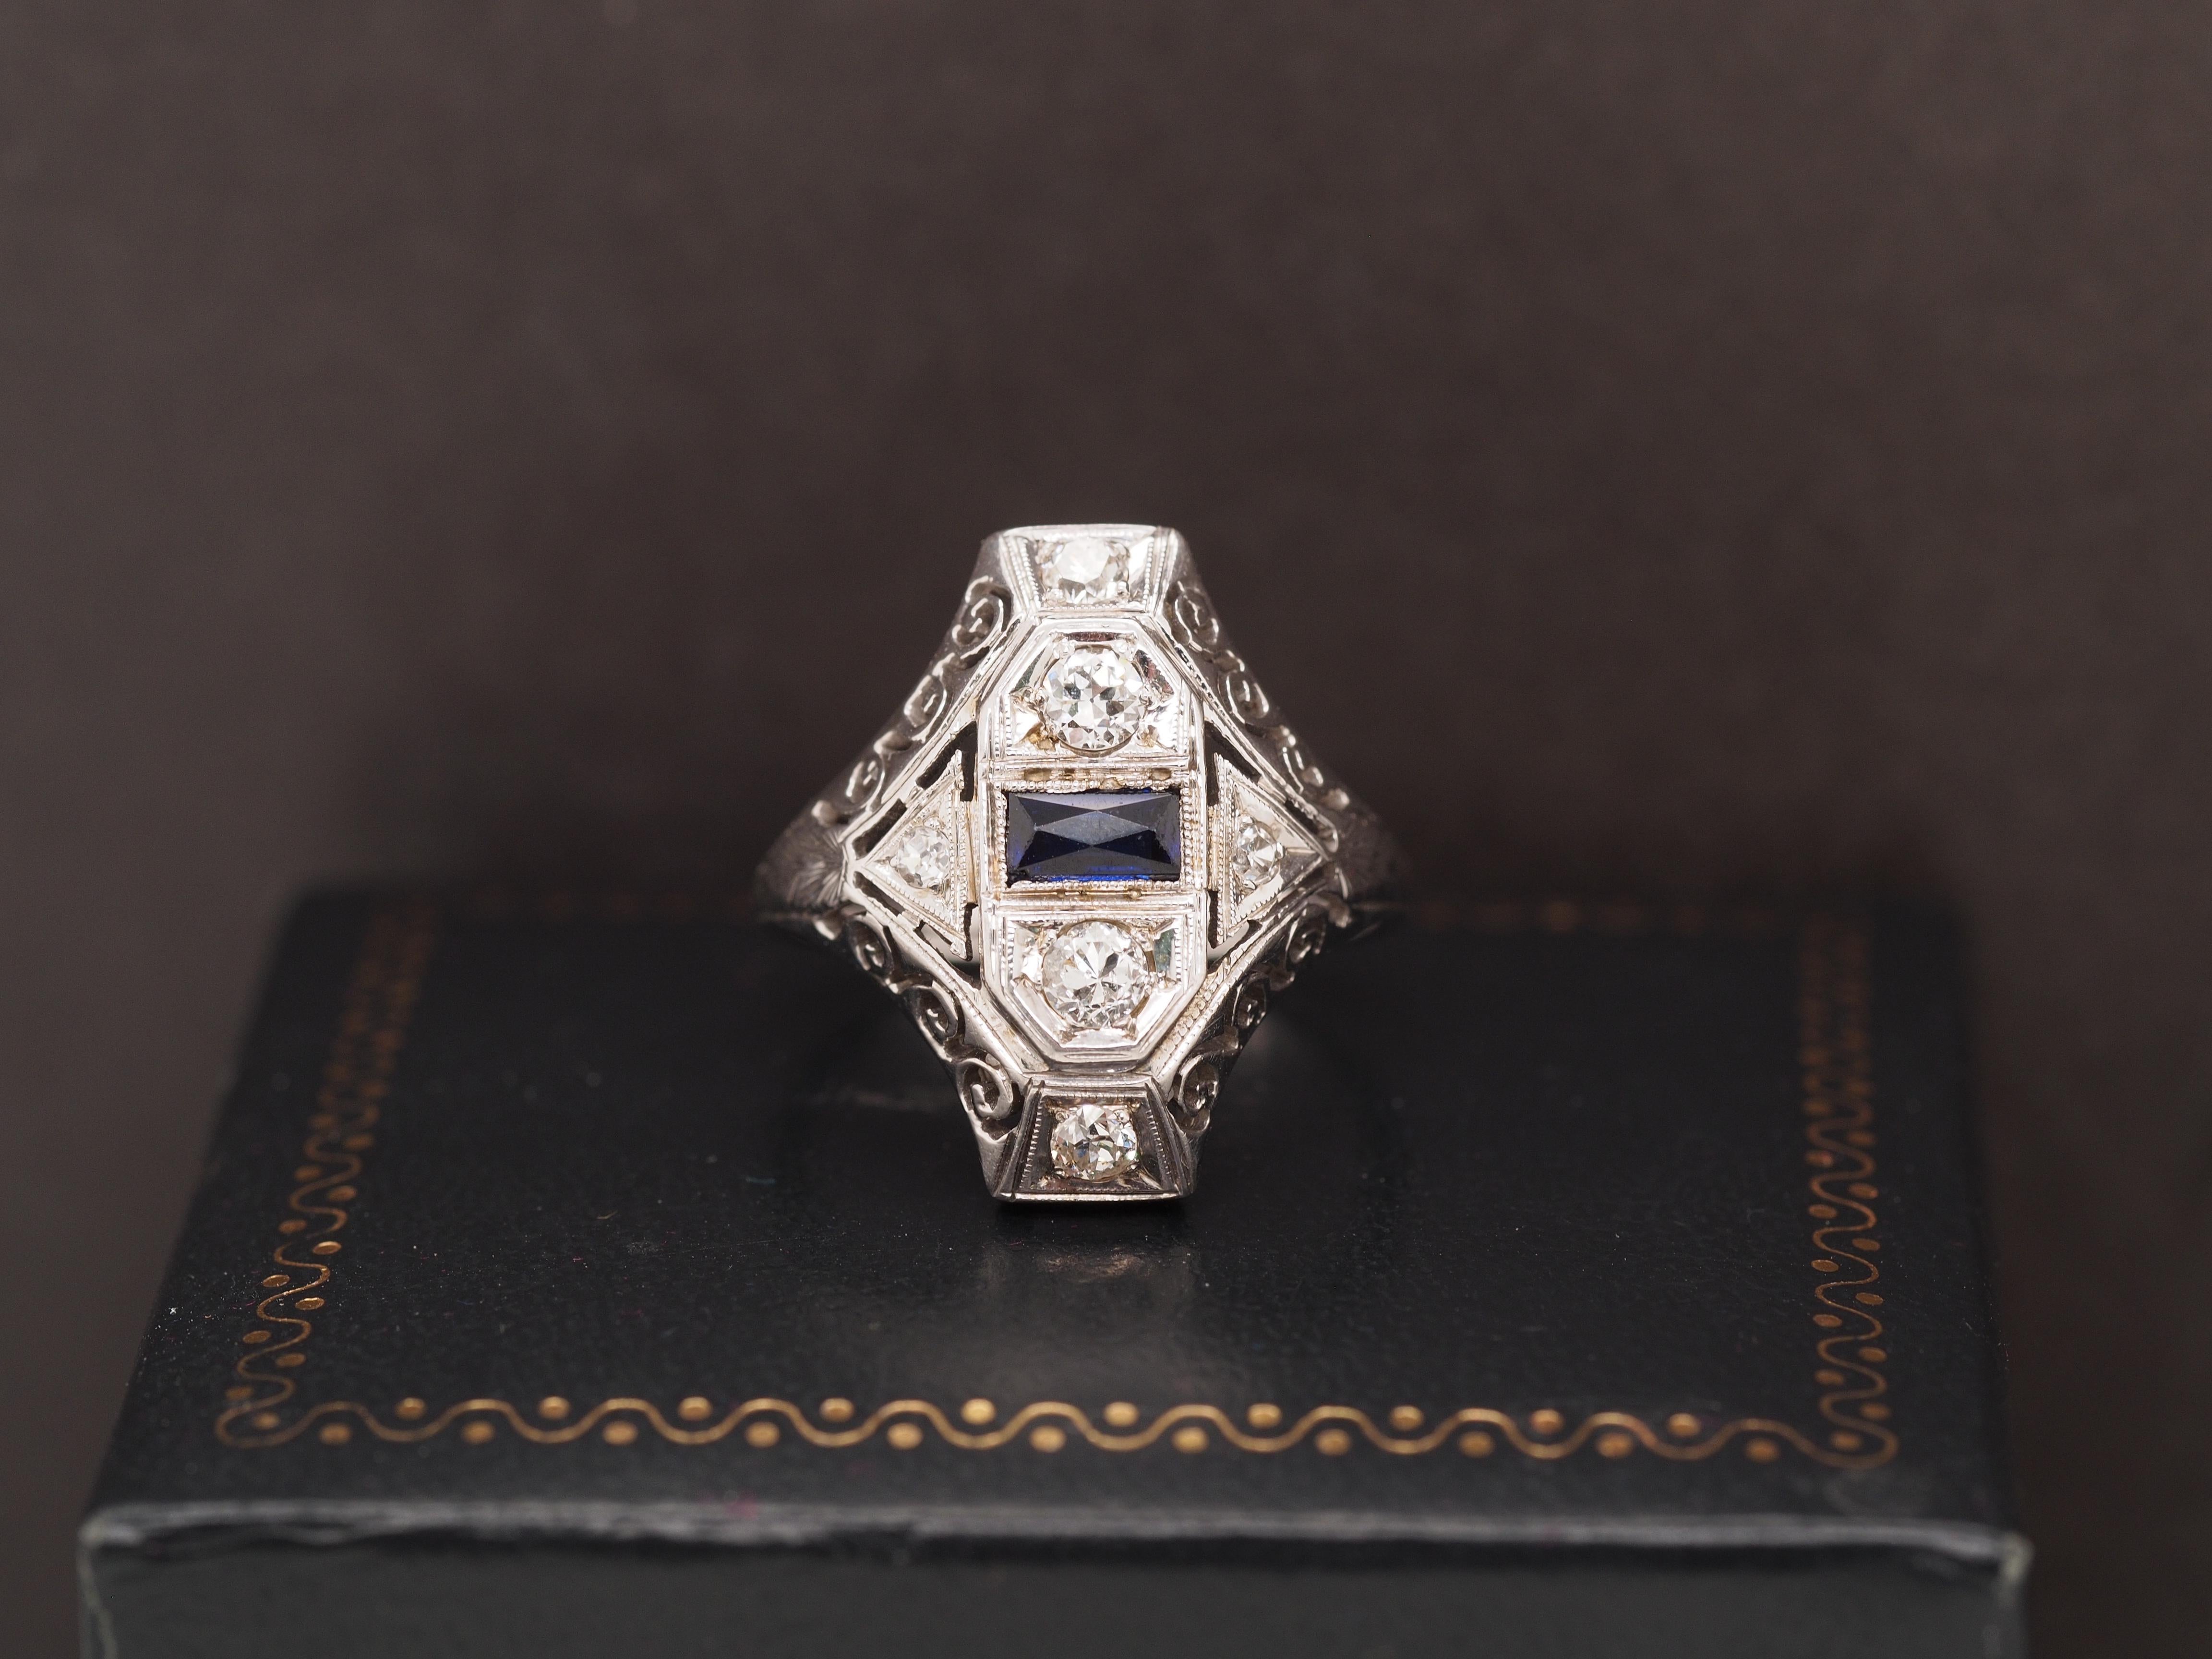 Year: 1920s
Item Details:
Ring Size: 6.75
Metal Type: 14K White Gold [Hallmarked, and Tested]
Weight: 4.1 grams
Diamond Details: .40ct, total weight. Natural Diamonds. SI clarity, G Color, Old European Brilliant
Side Stone Details: French Cut